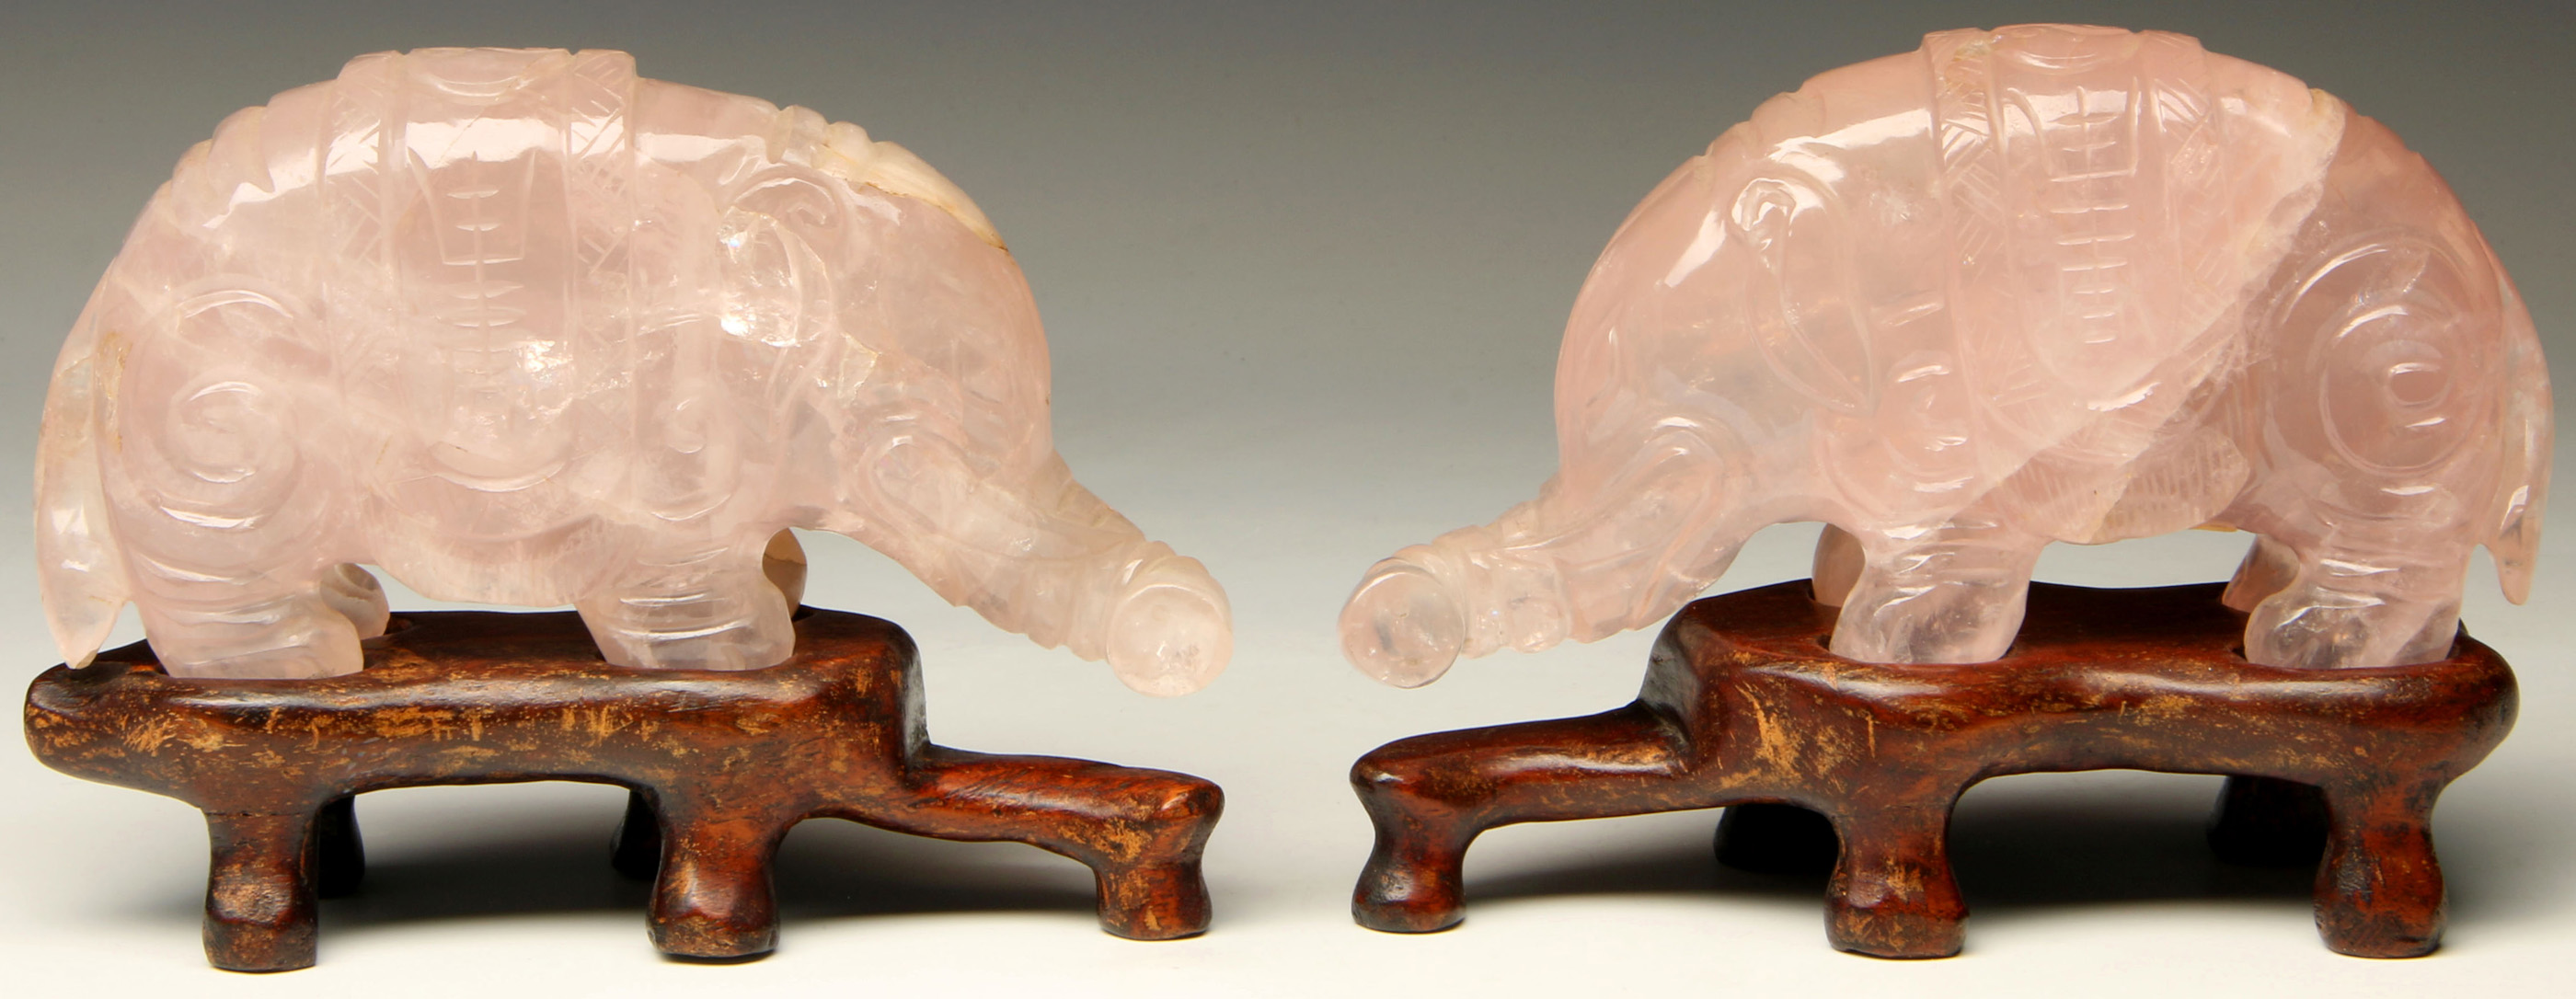 A PAIR CHINESE ROSE QUARTZ CARVED ELEPHANTS